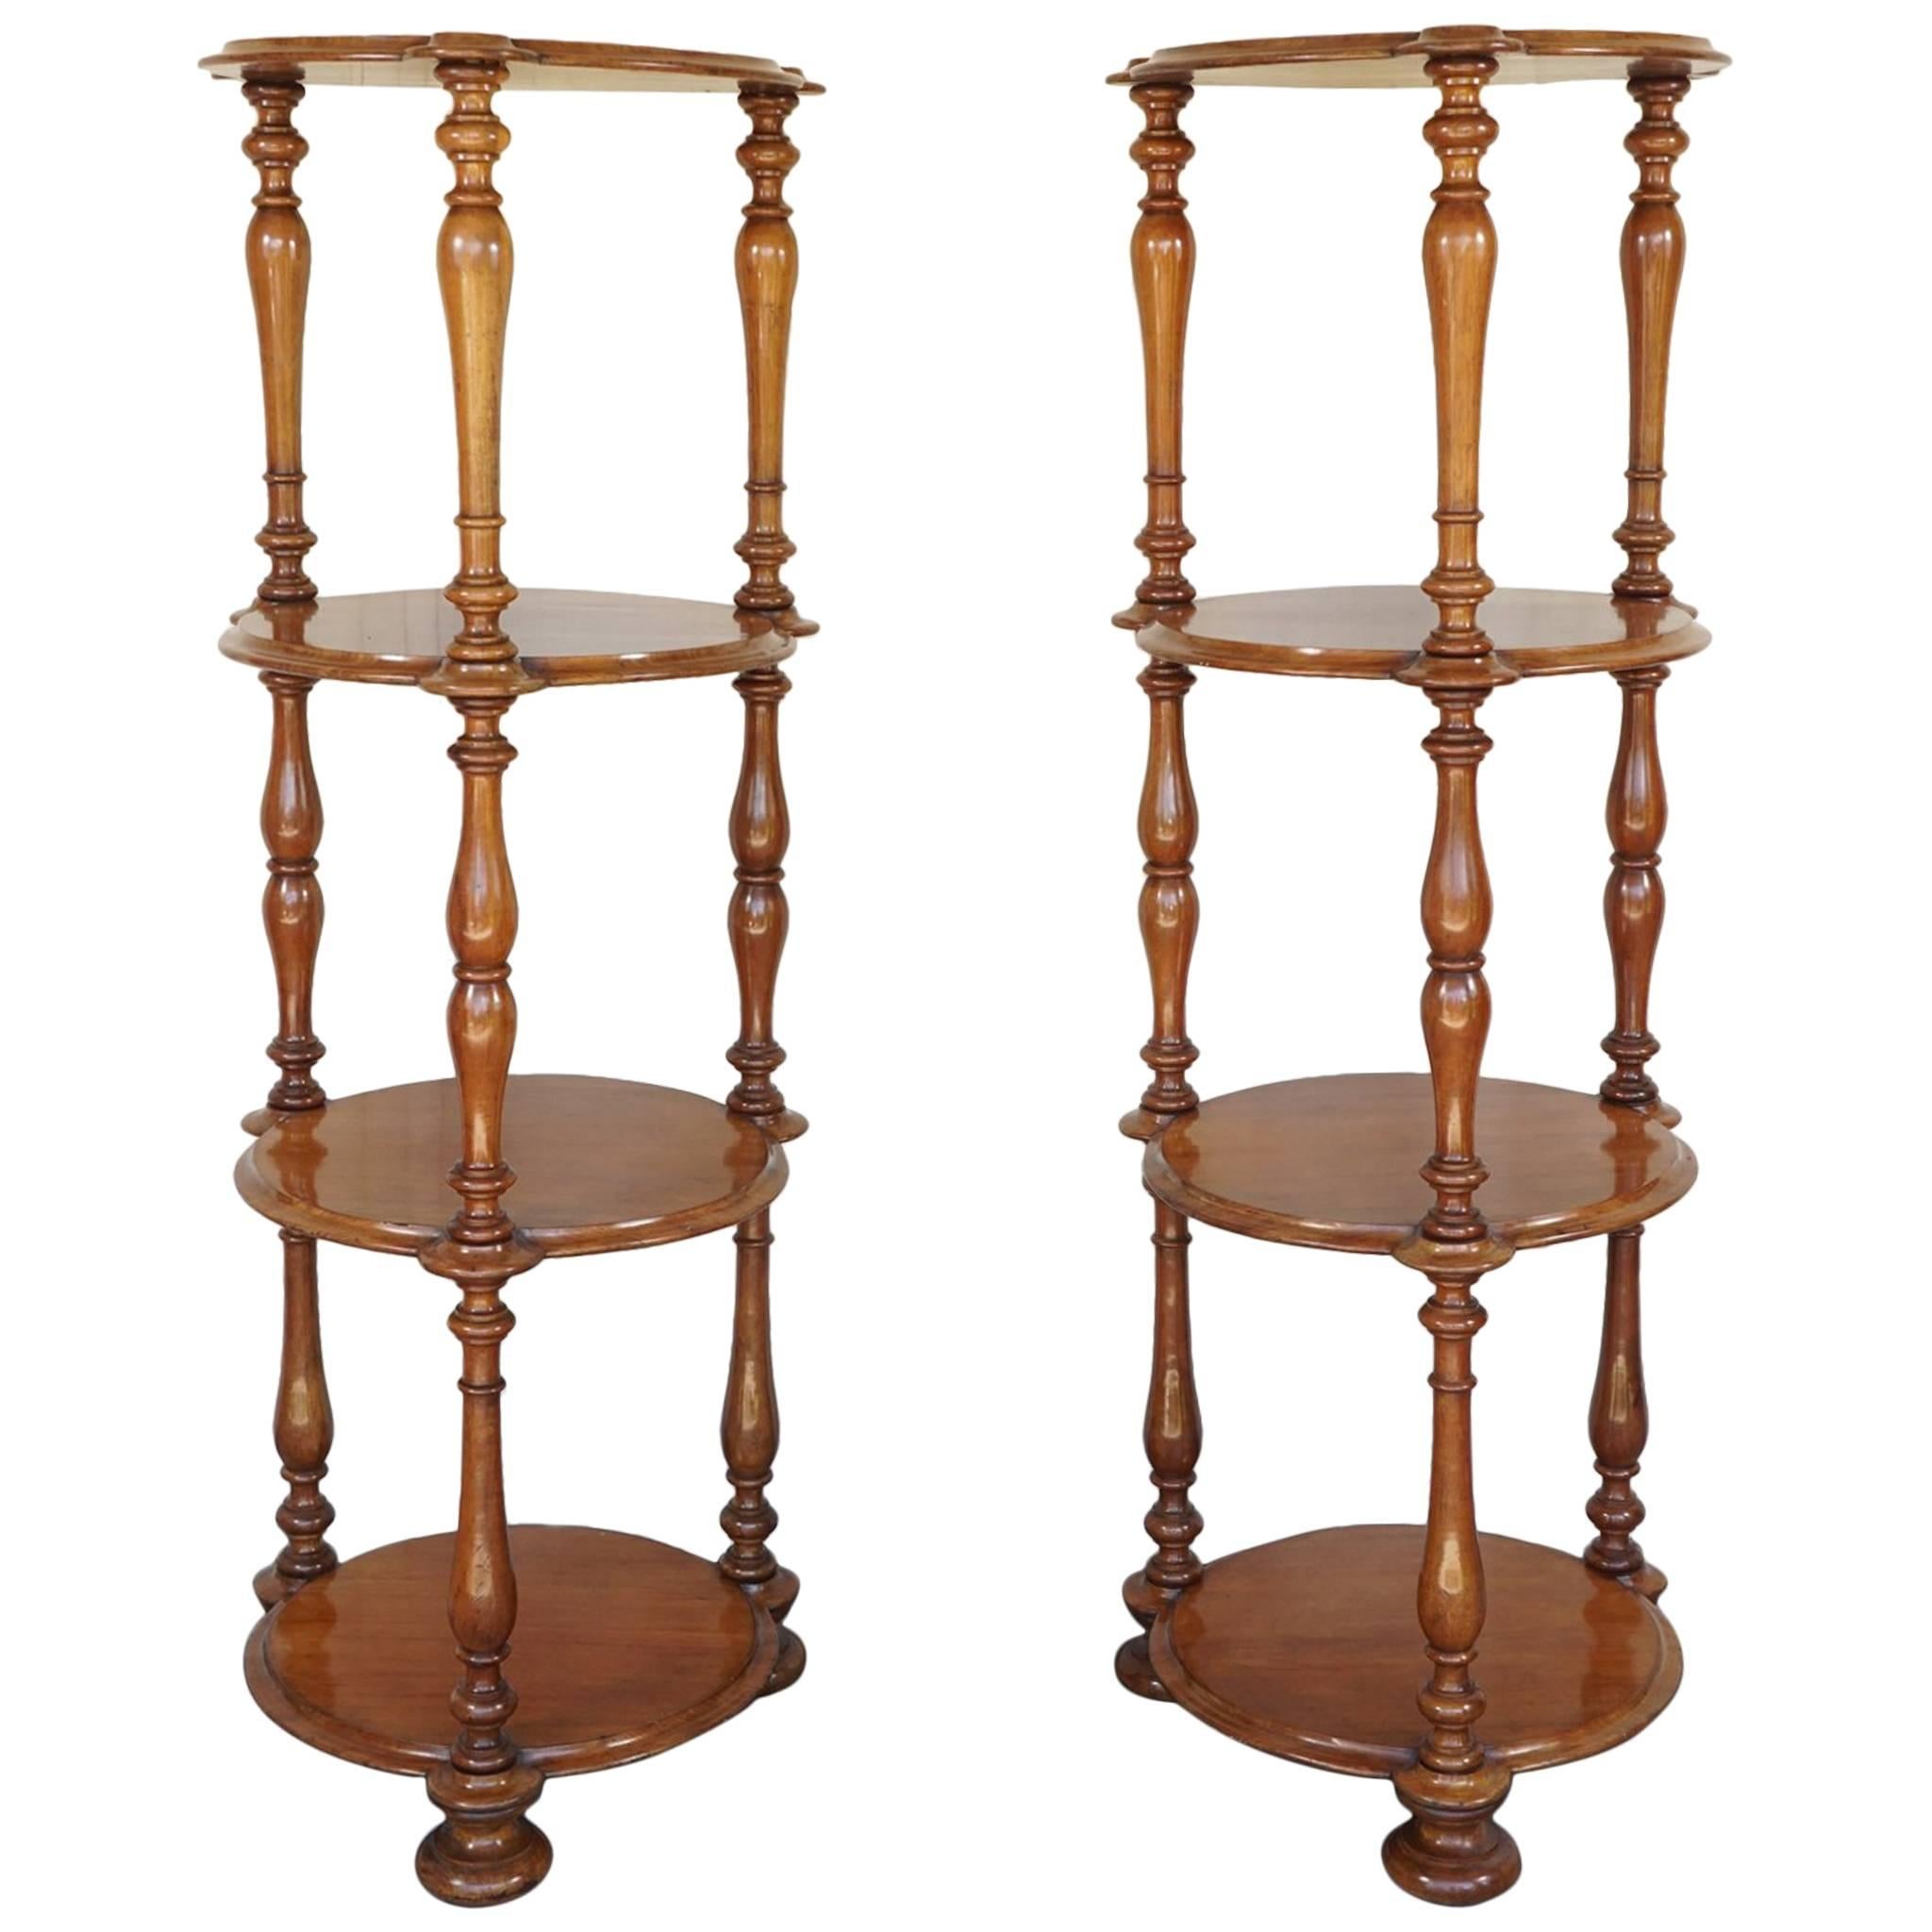 Pair of 19th Century English Mahogany Early Victorian Étagère’s